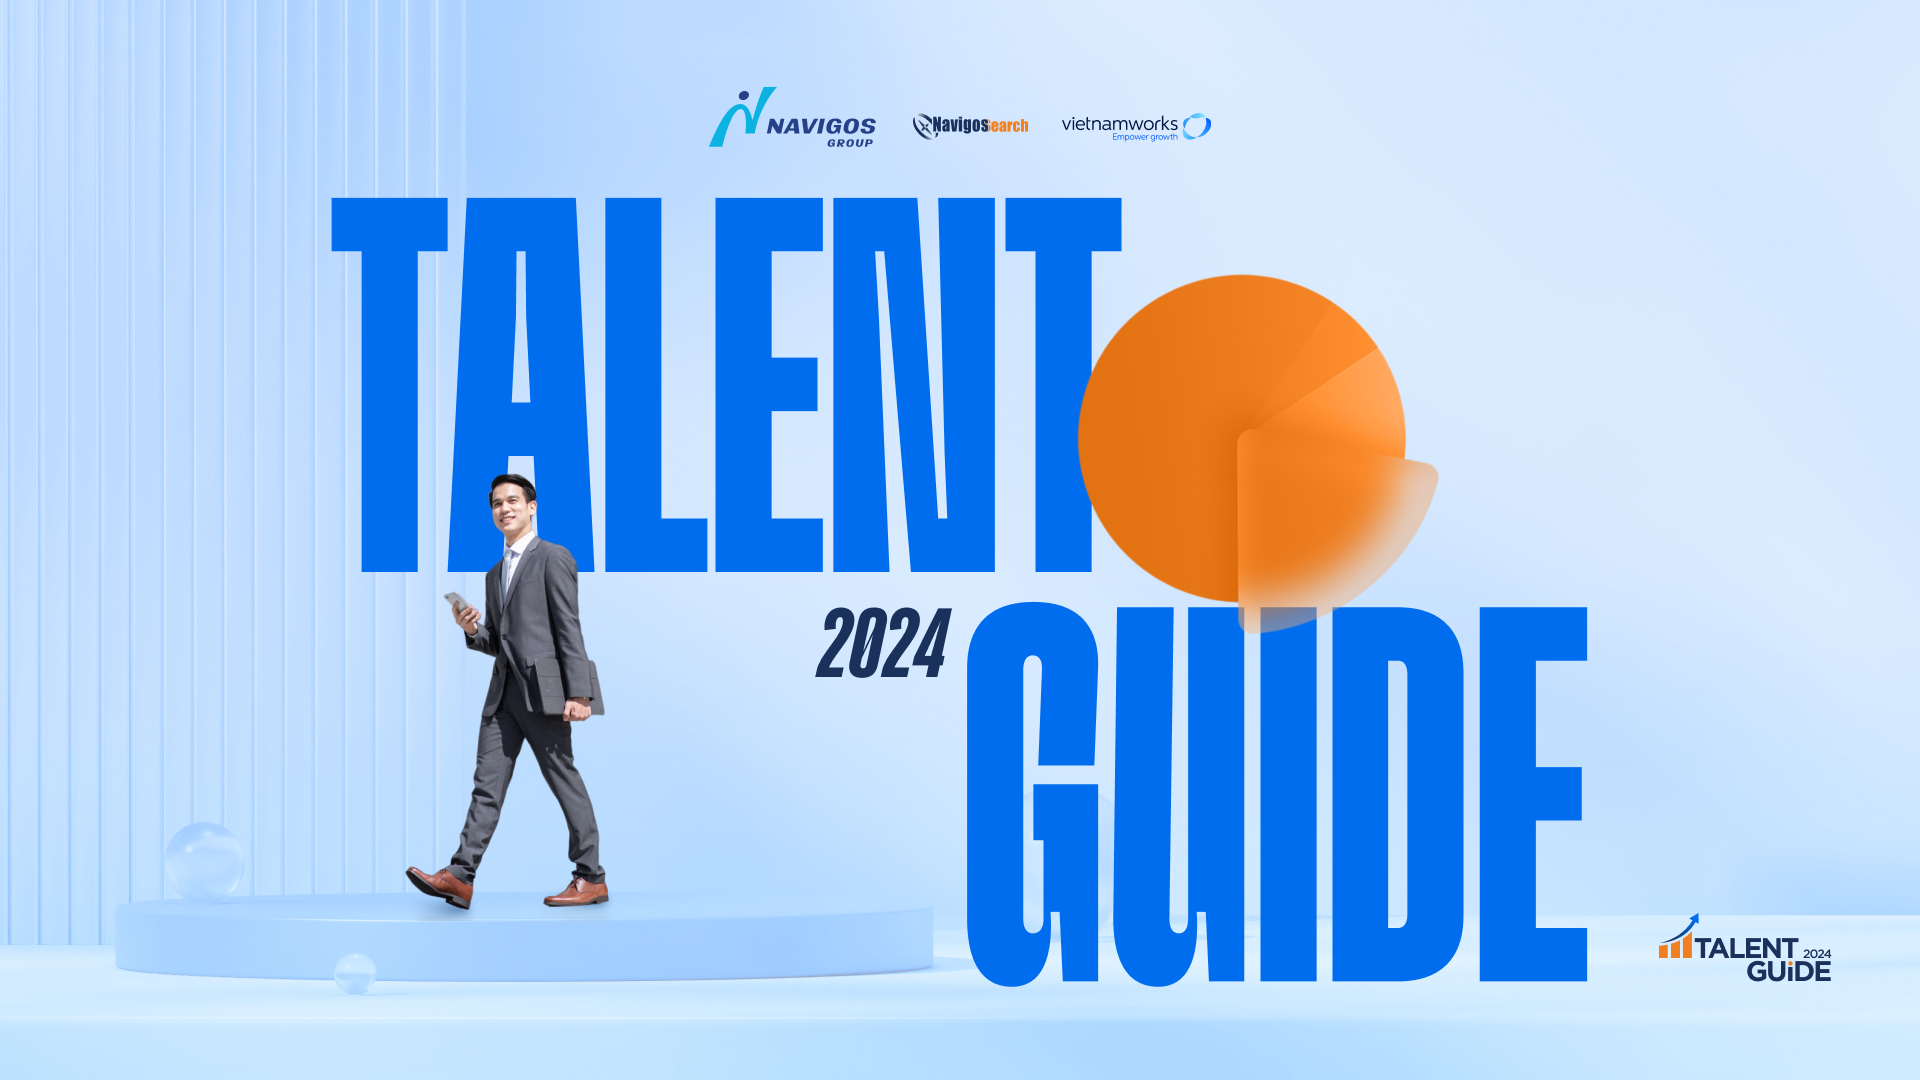 Talent Guide 2024: Salary and Labor Market Report is Officially Launched